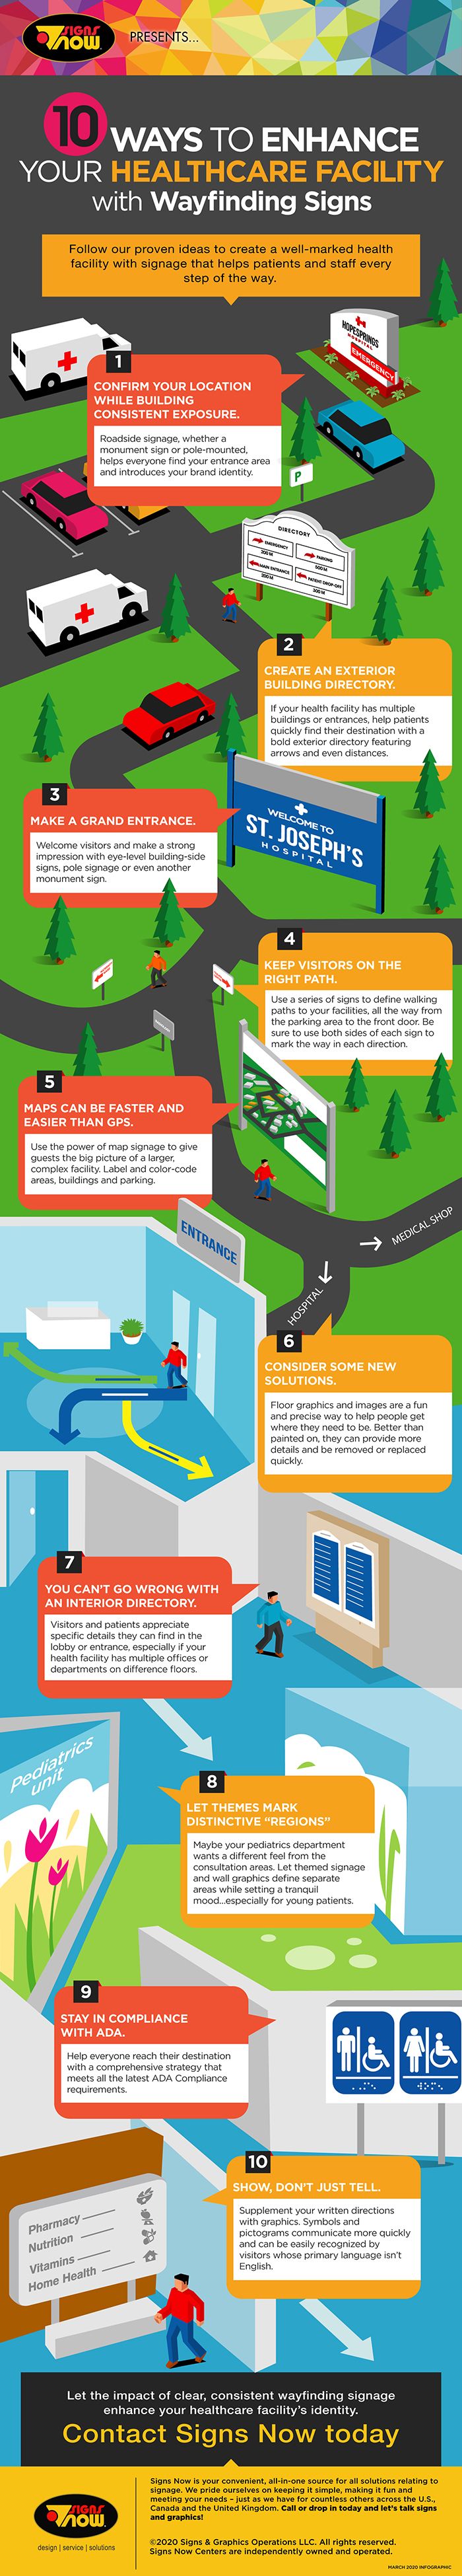 Infographic on 10 Ways to Enhance your Healthcare Facility with Wayfinding Signs